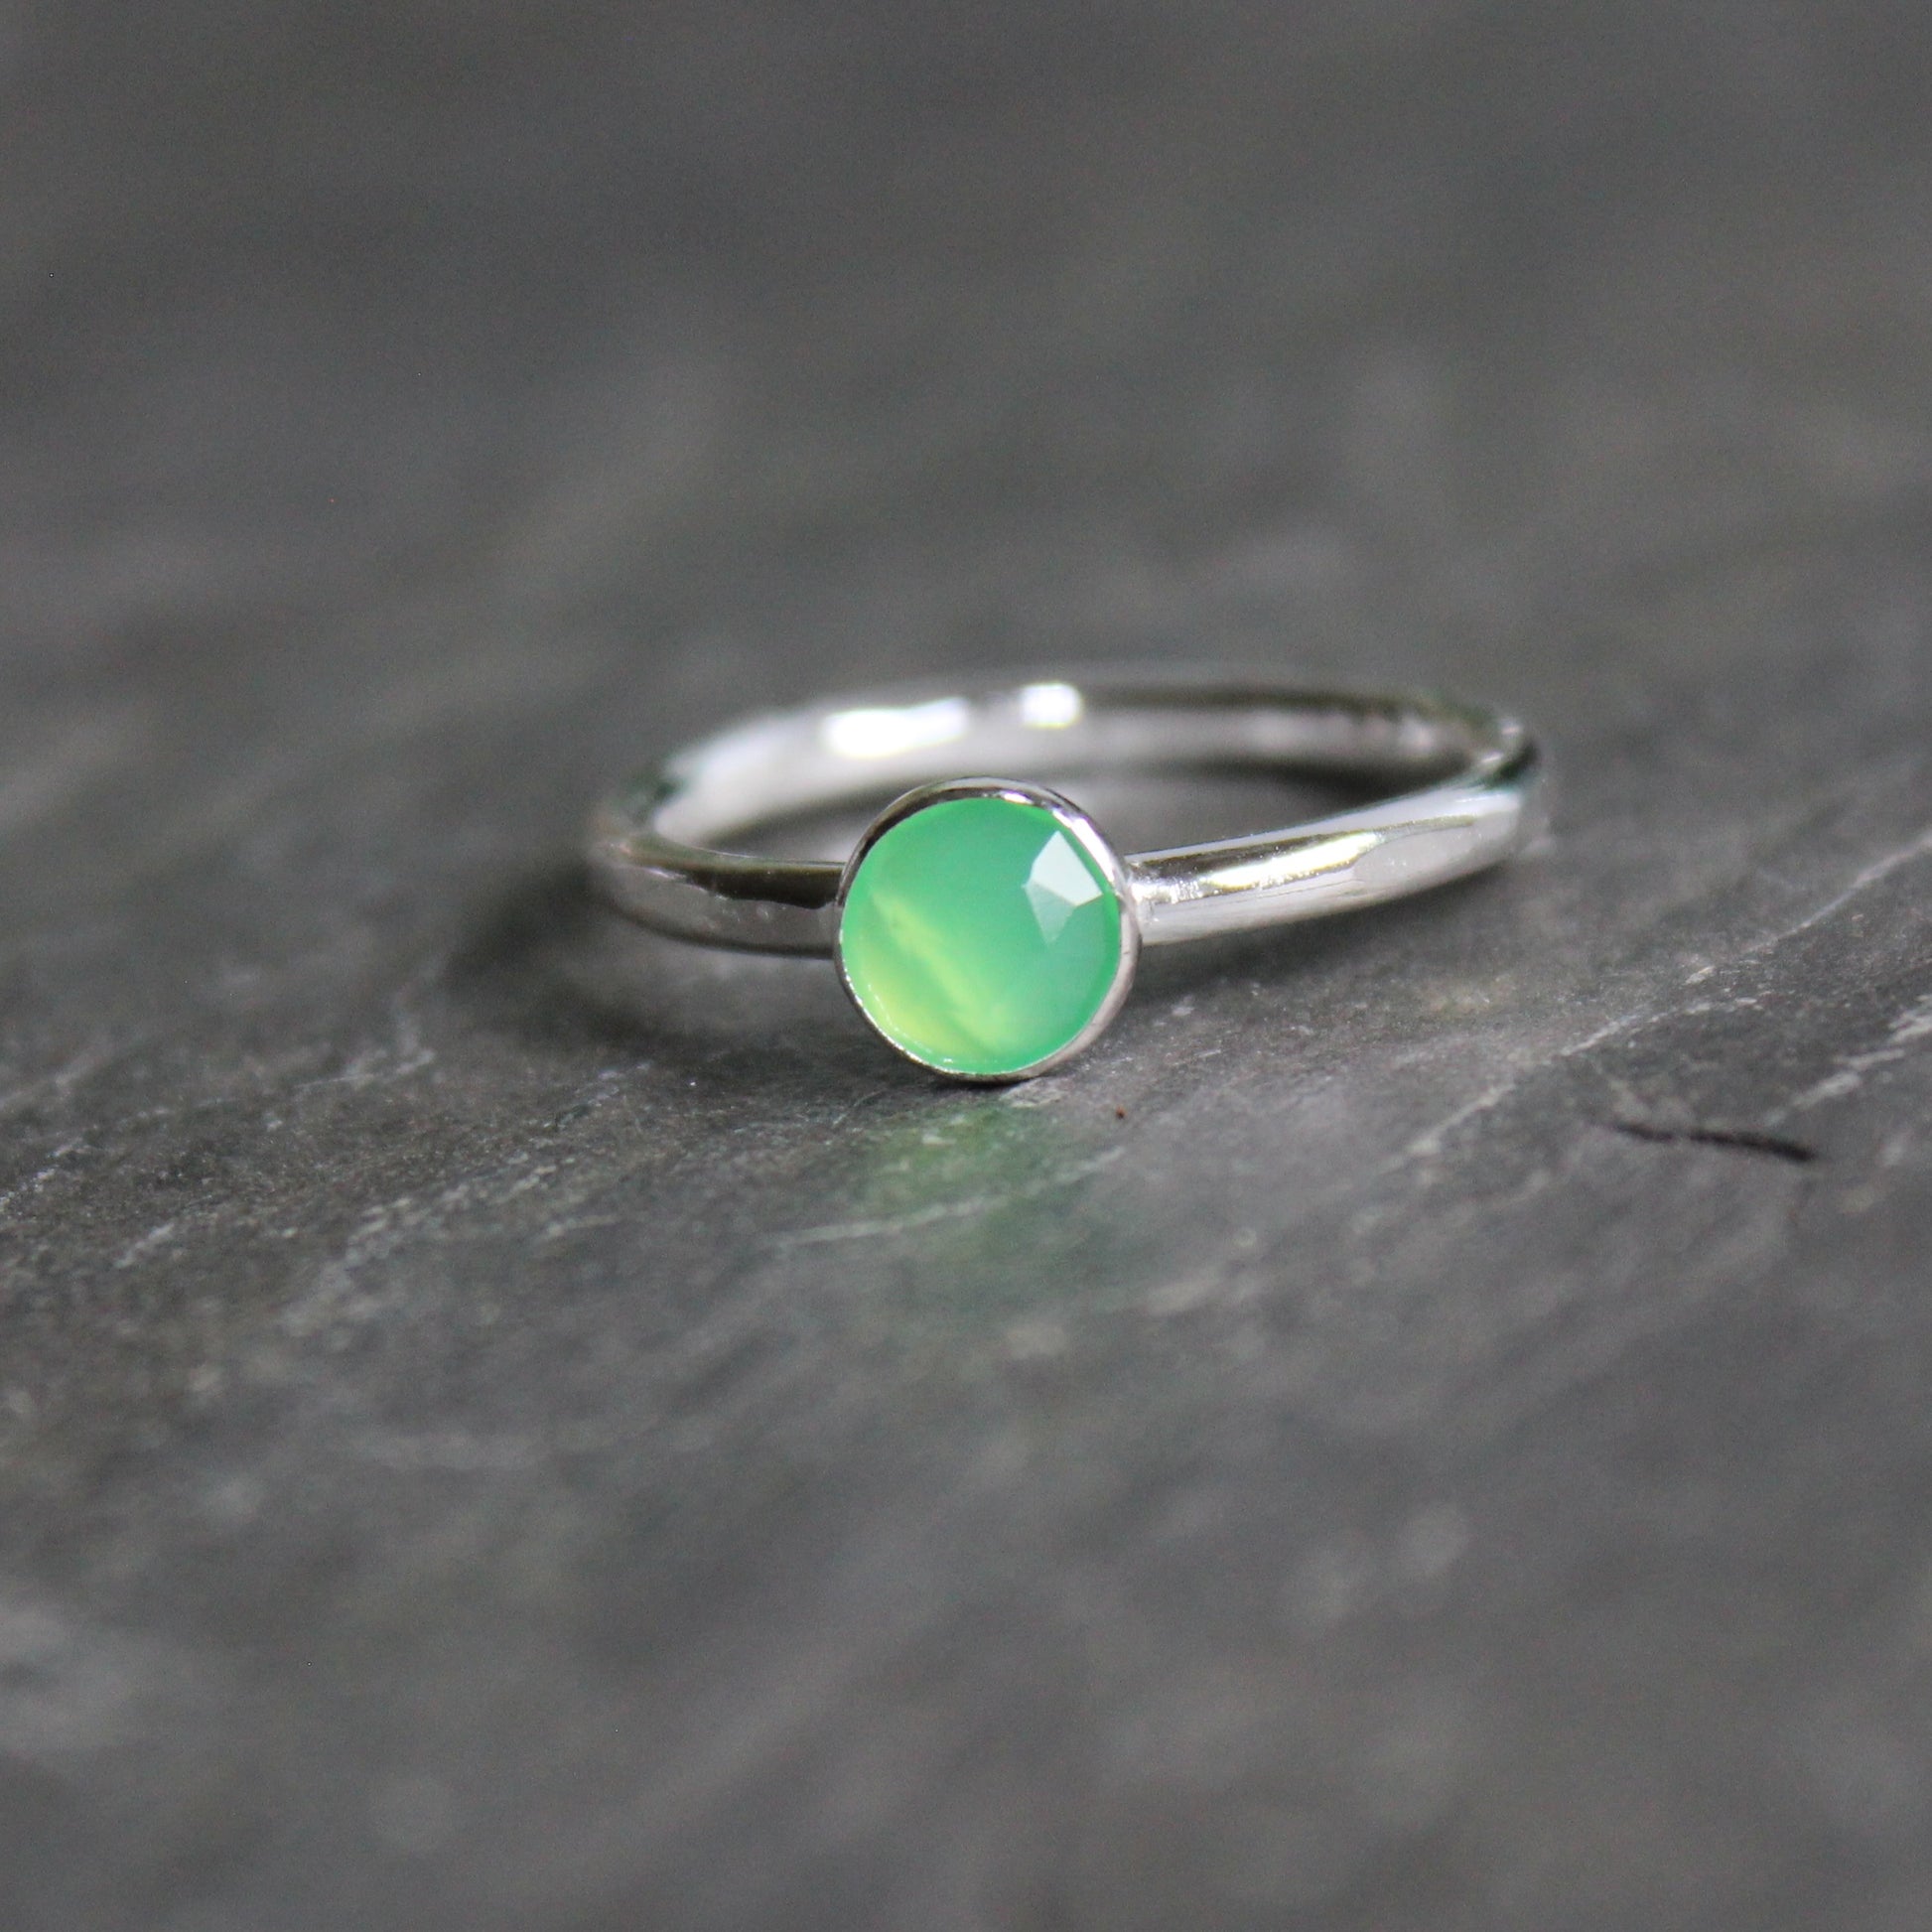 A 6mm rose cut round chrysoprase cabochon set in a sterling silver bezel setting on a sturdy silver band. 